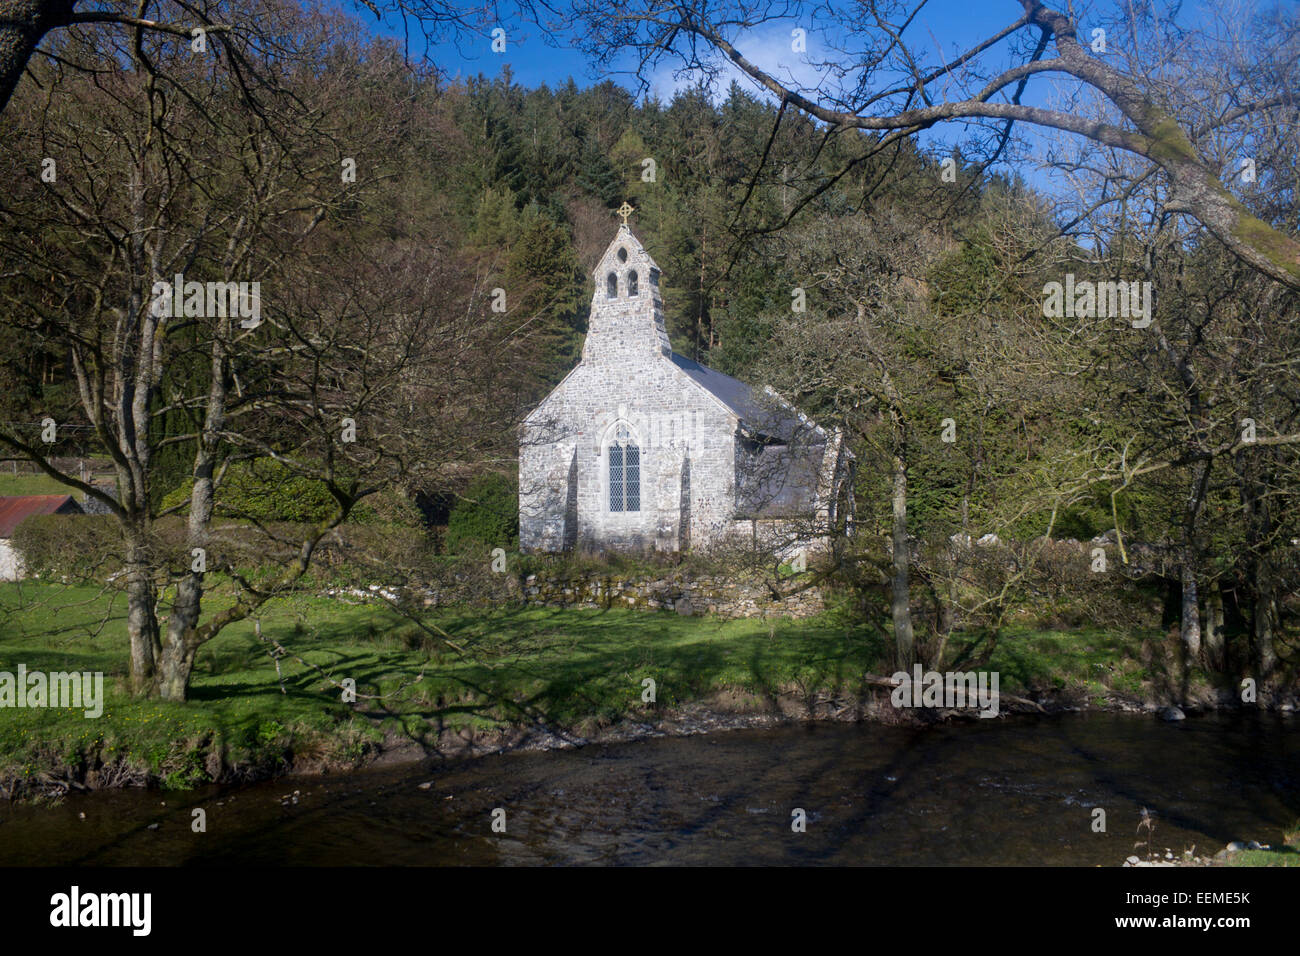 St Anno's Church Llananno from across River Ithon Radnorshire Powys Mid Wales UK The church was the subject of R S Thomas' poem Stock Photo